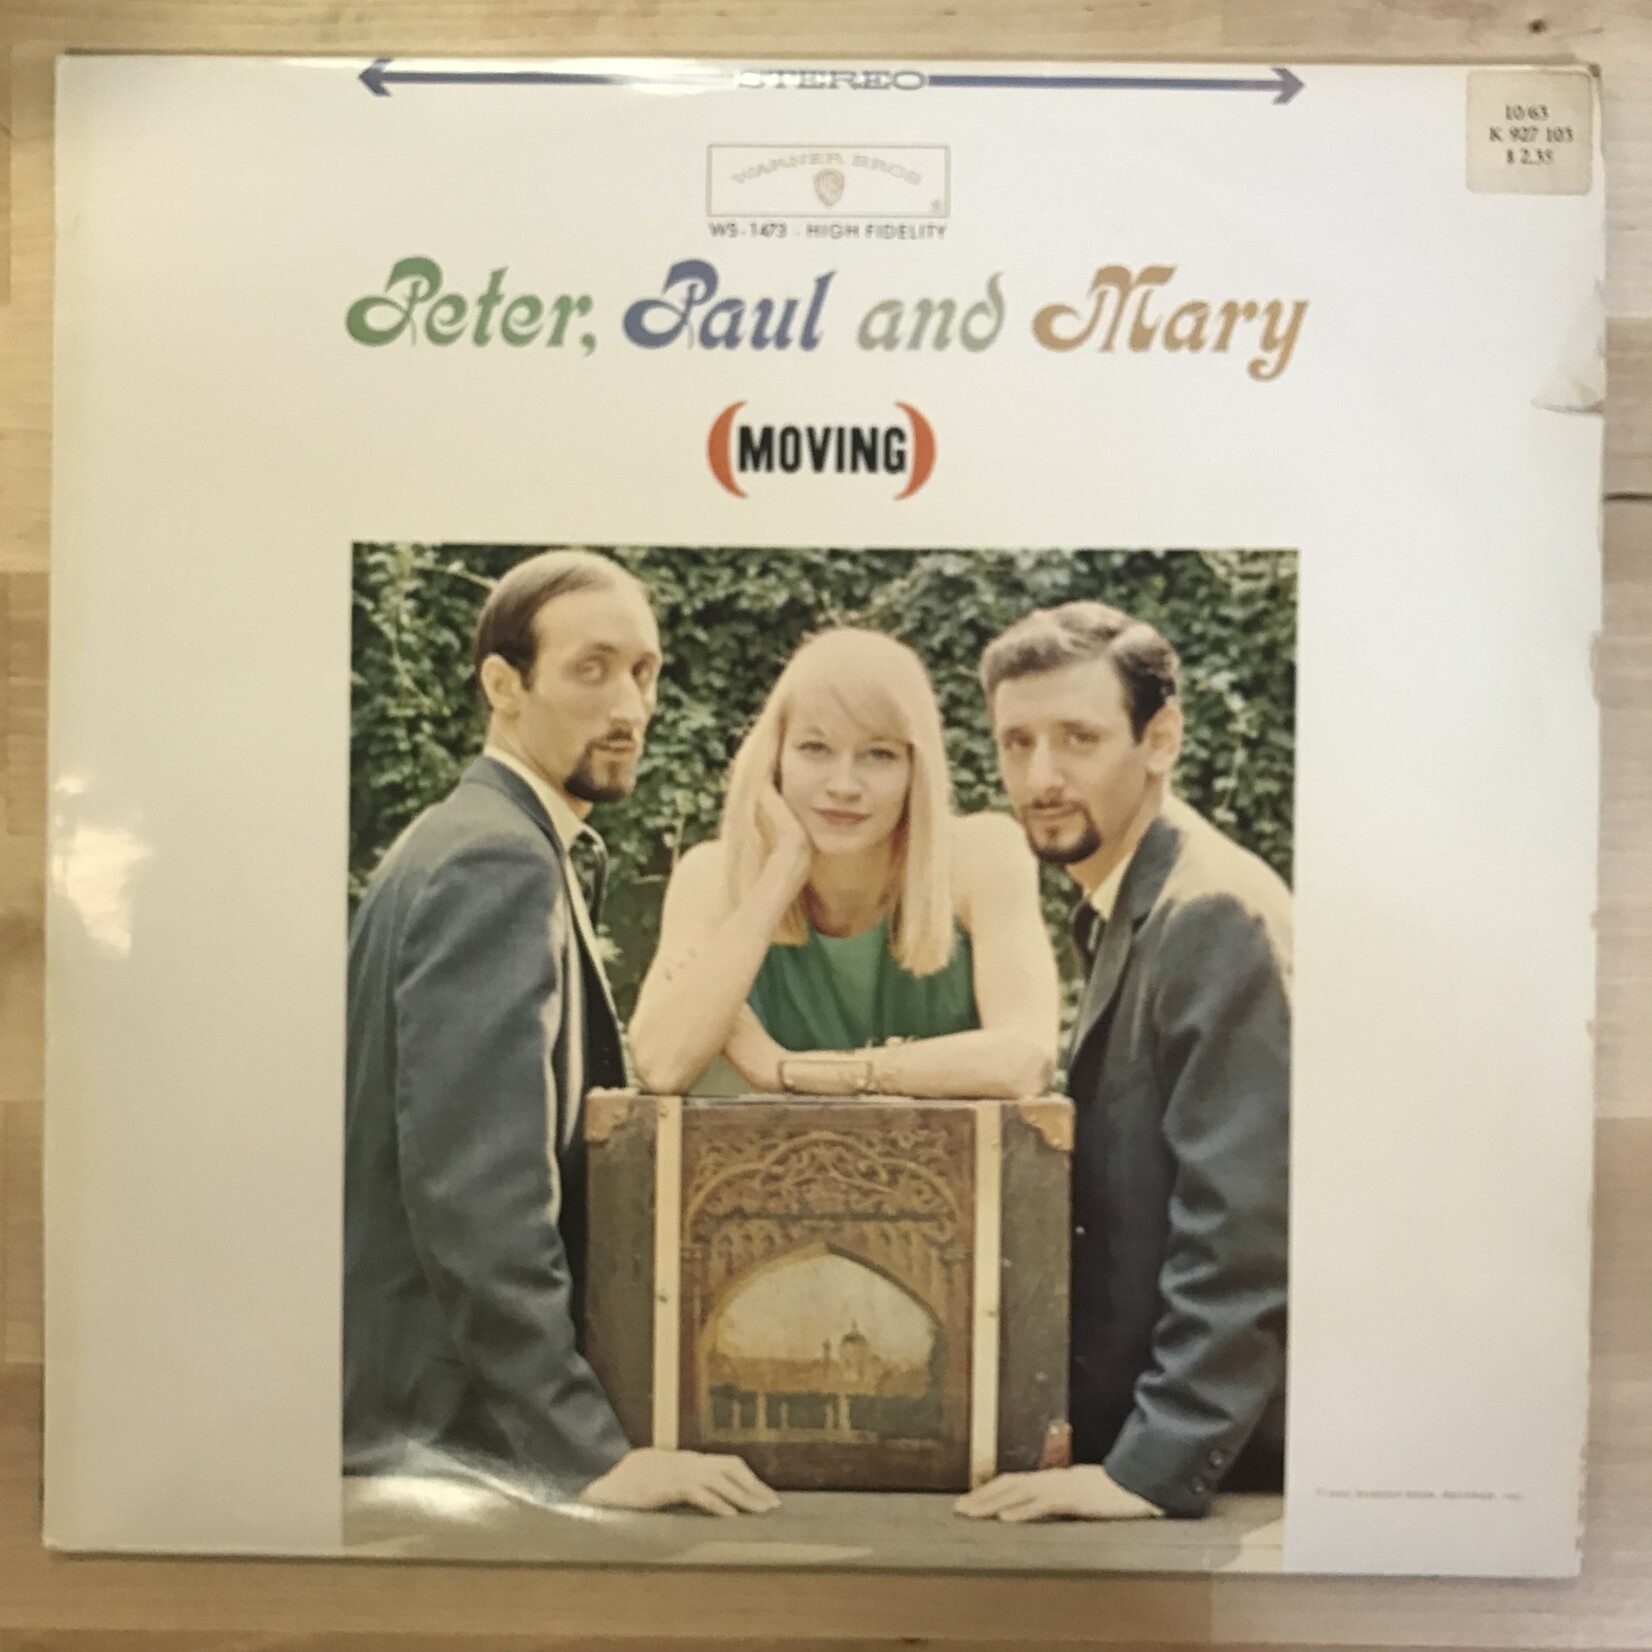 Peter, Paul And Mary - Moving - WS1474 - Vinyl LP (USED - GERMANY)